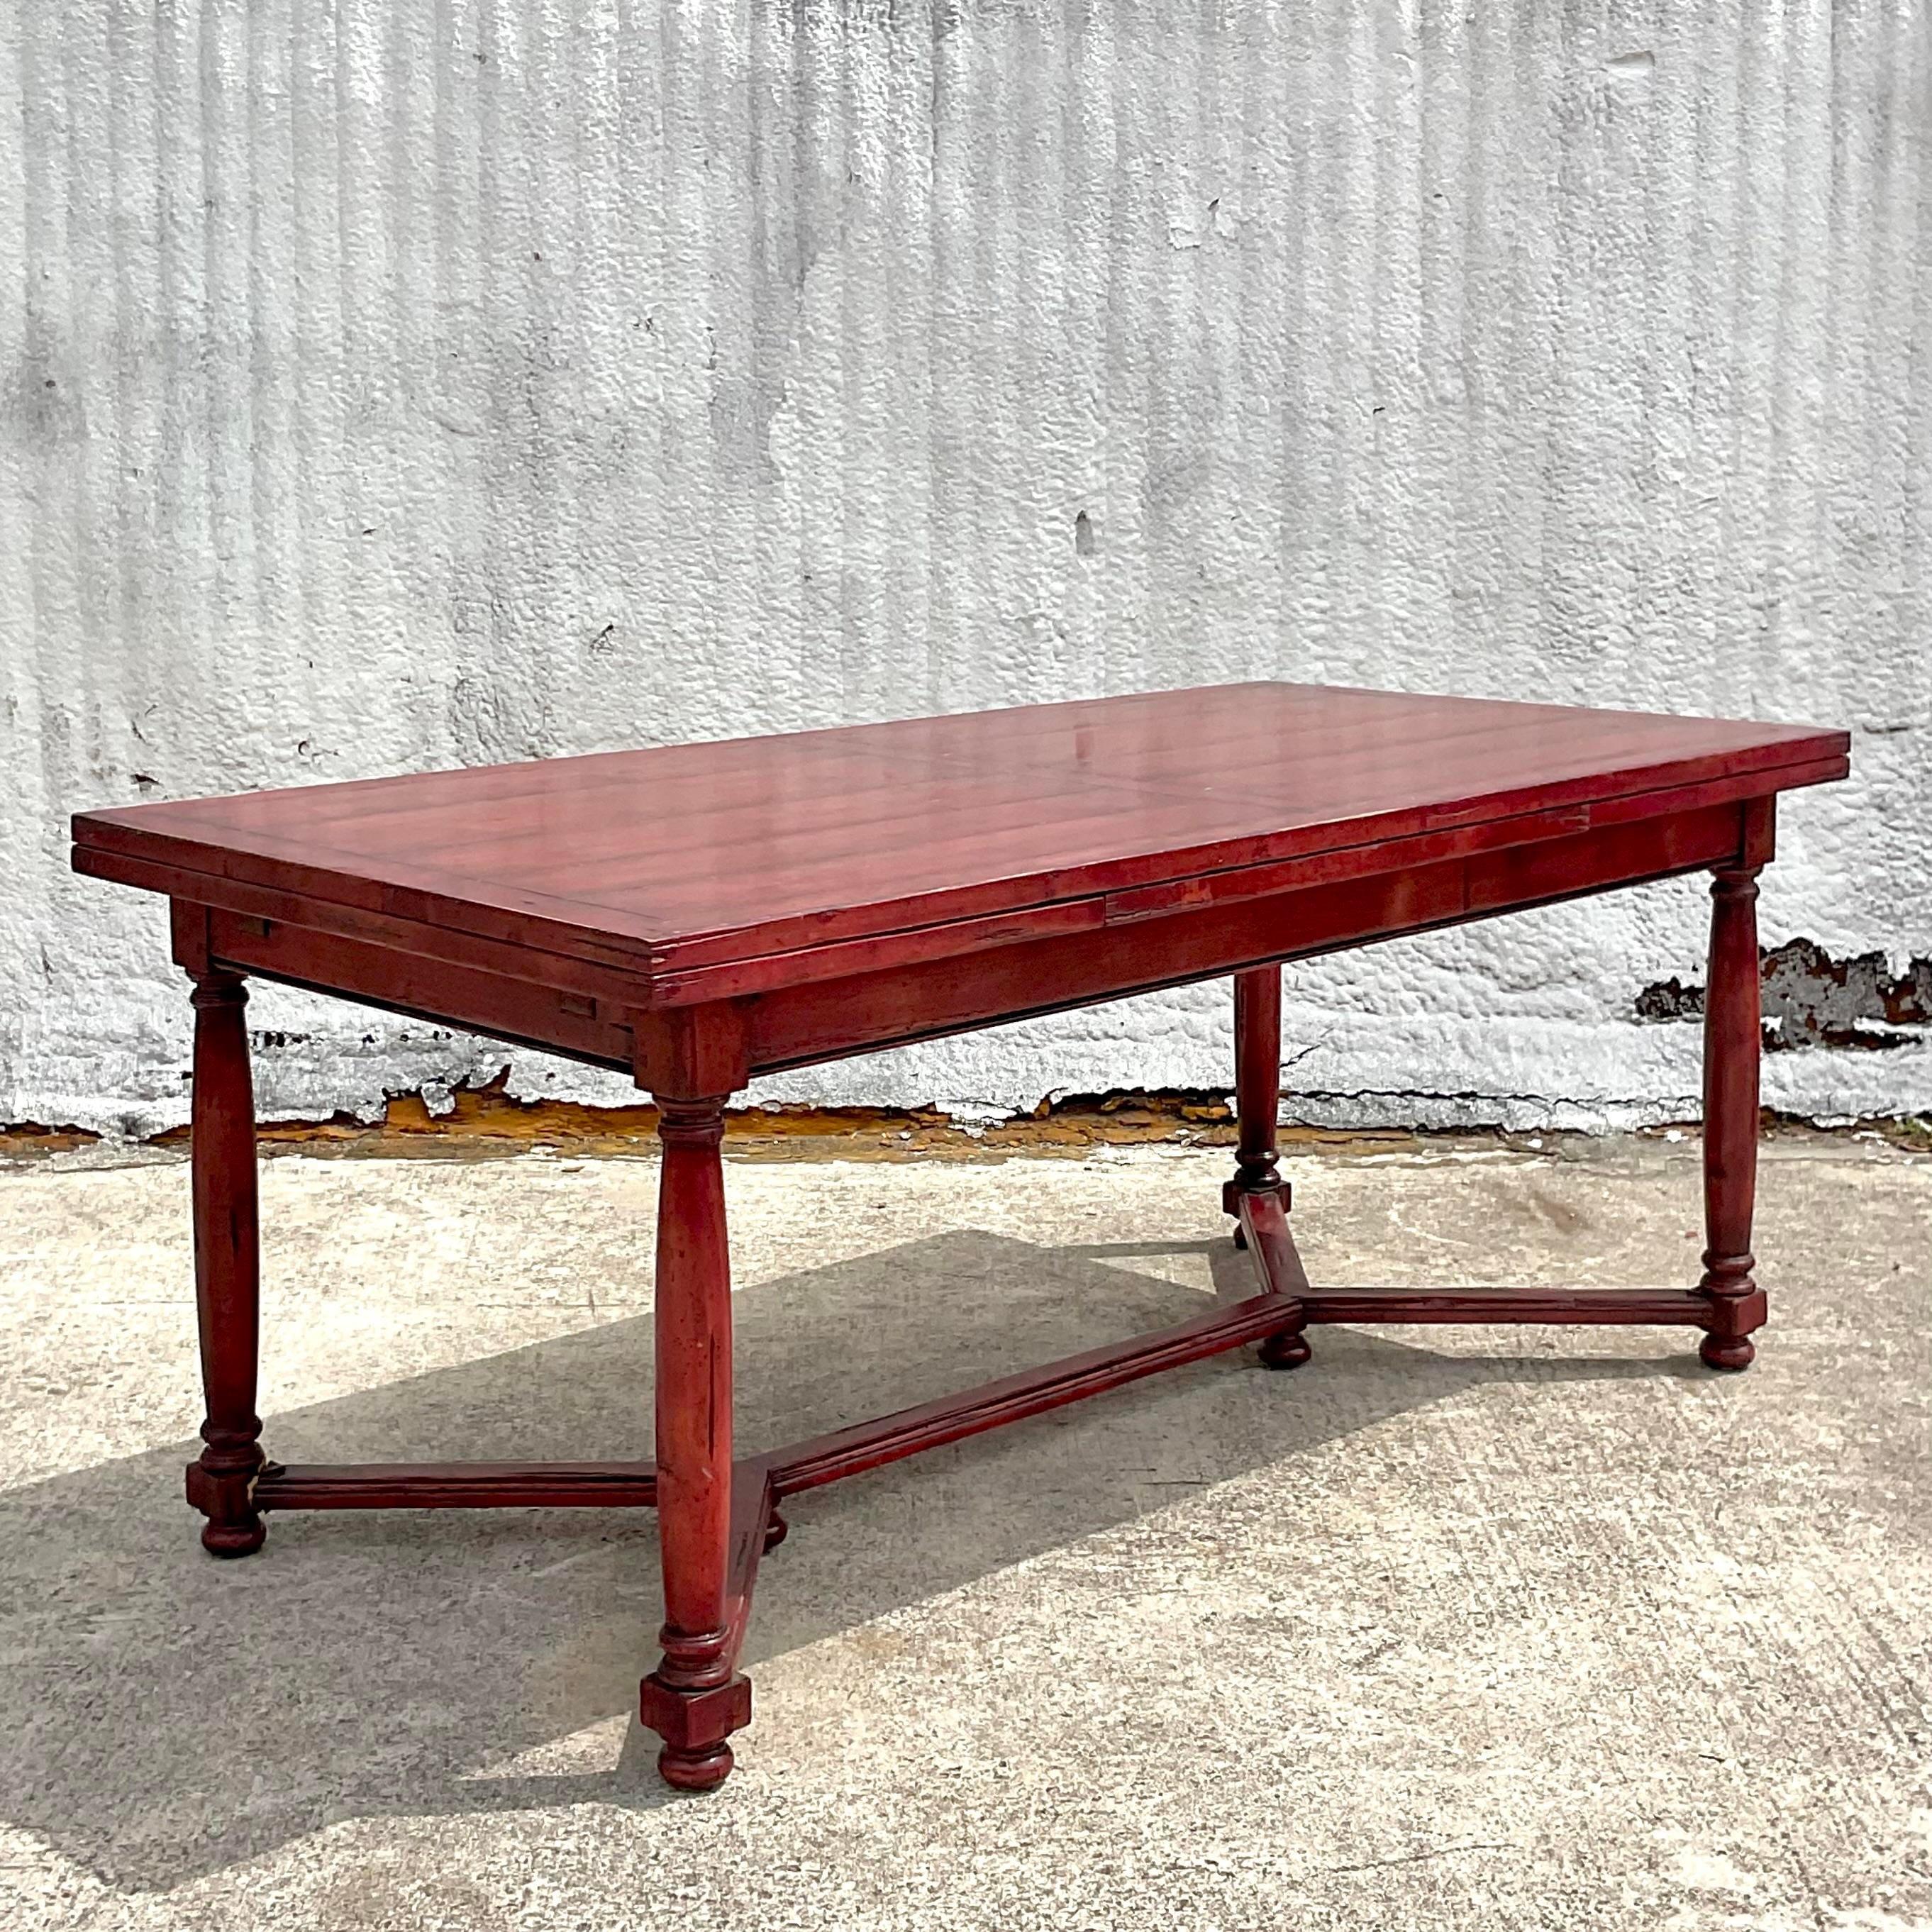 A stunning vintage Boho dining table. A chic vintage reclaimed wood farm table with extendable sides. Painted a brilliant Moroccan red. Acquired from a Palm Beach estate.